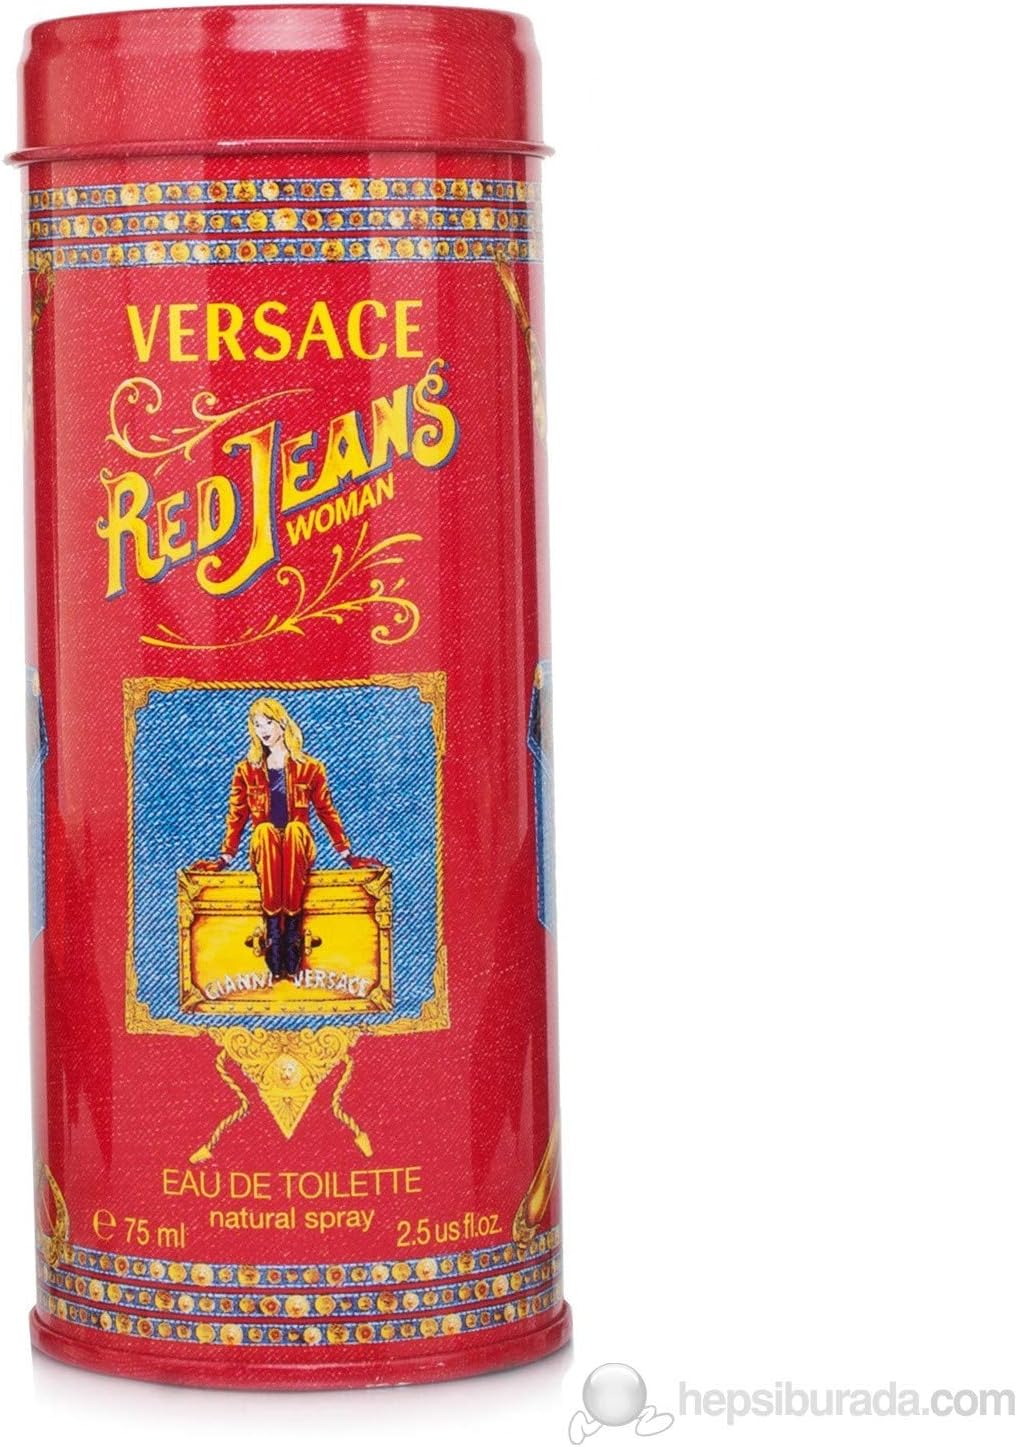 Versace RED JEANS by Gianni for WOMEN: EDT SPRAY 2.5 OZ (NEW PACKAGING)